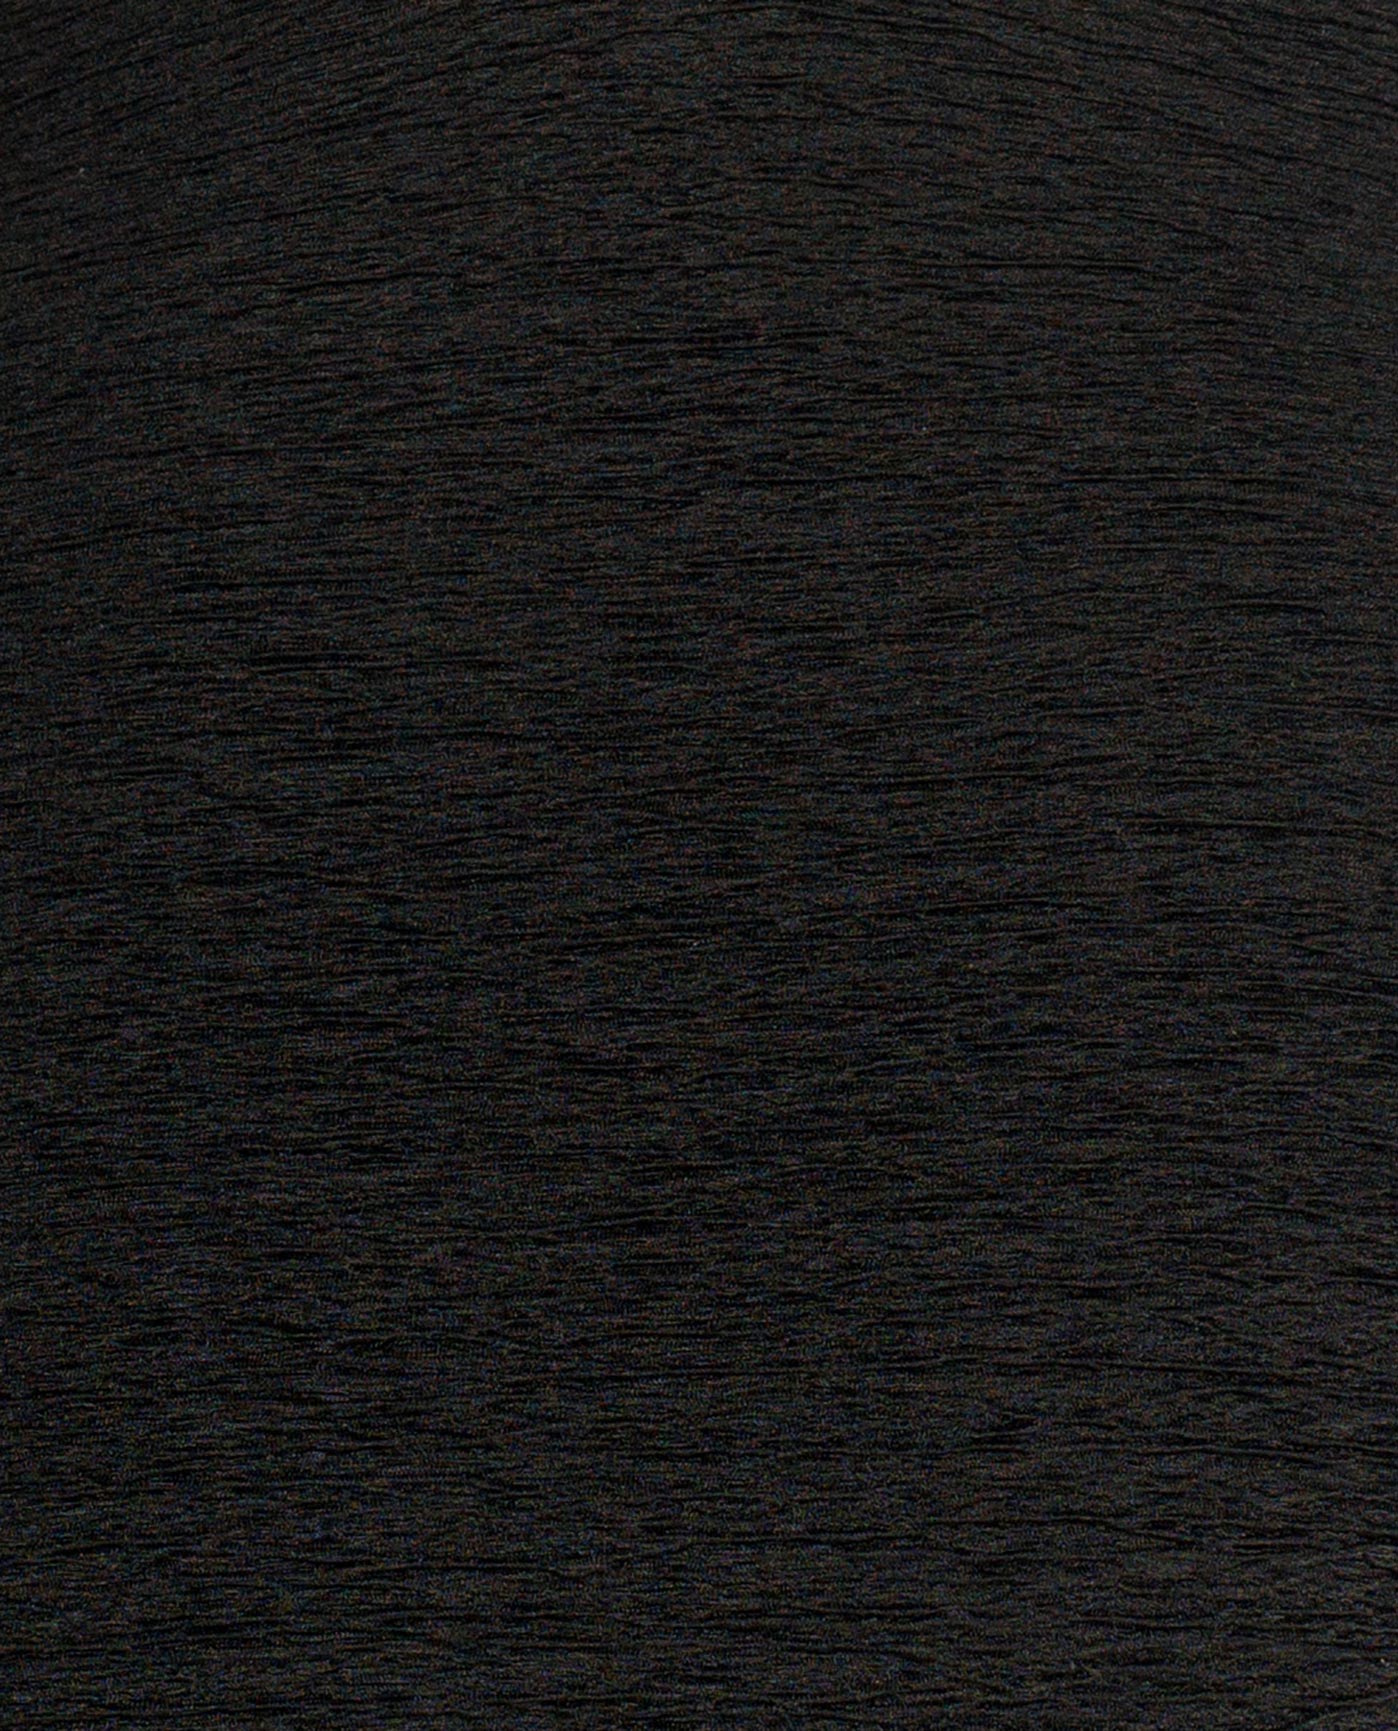 FABRIC SWATCH VIEW OF CHLORINE RESISTANT KRINKLE TEXTURED SOLID CROSS BACK D-CUP ONE PIECE | KRINKLE BLACK 2023